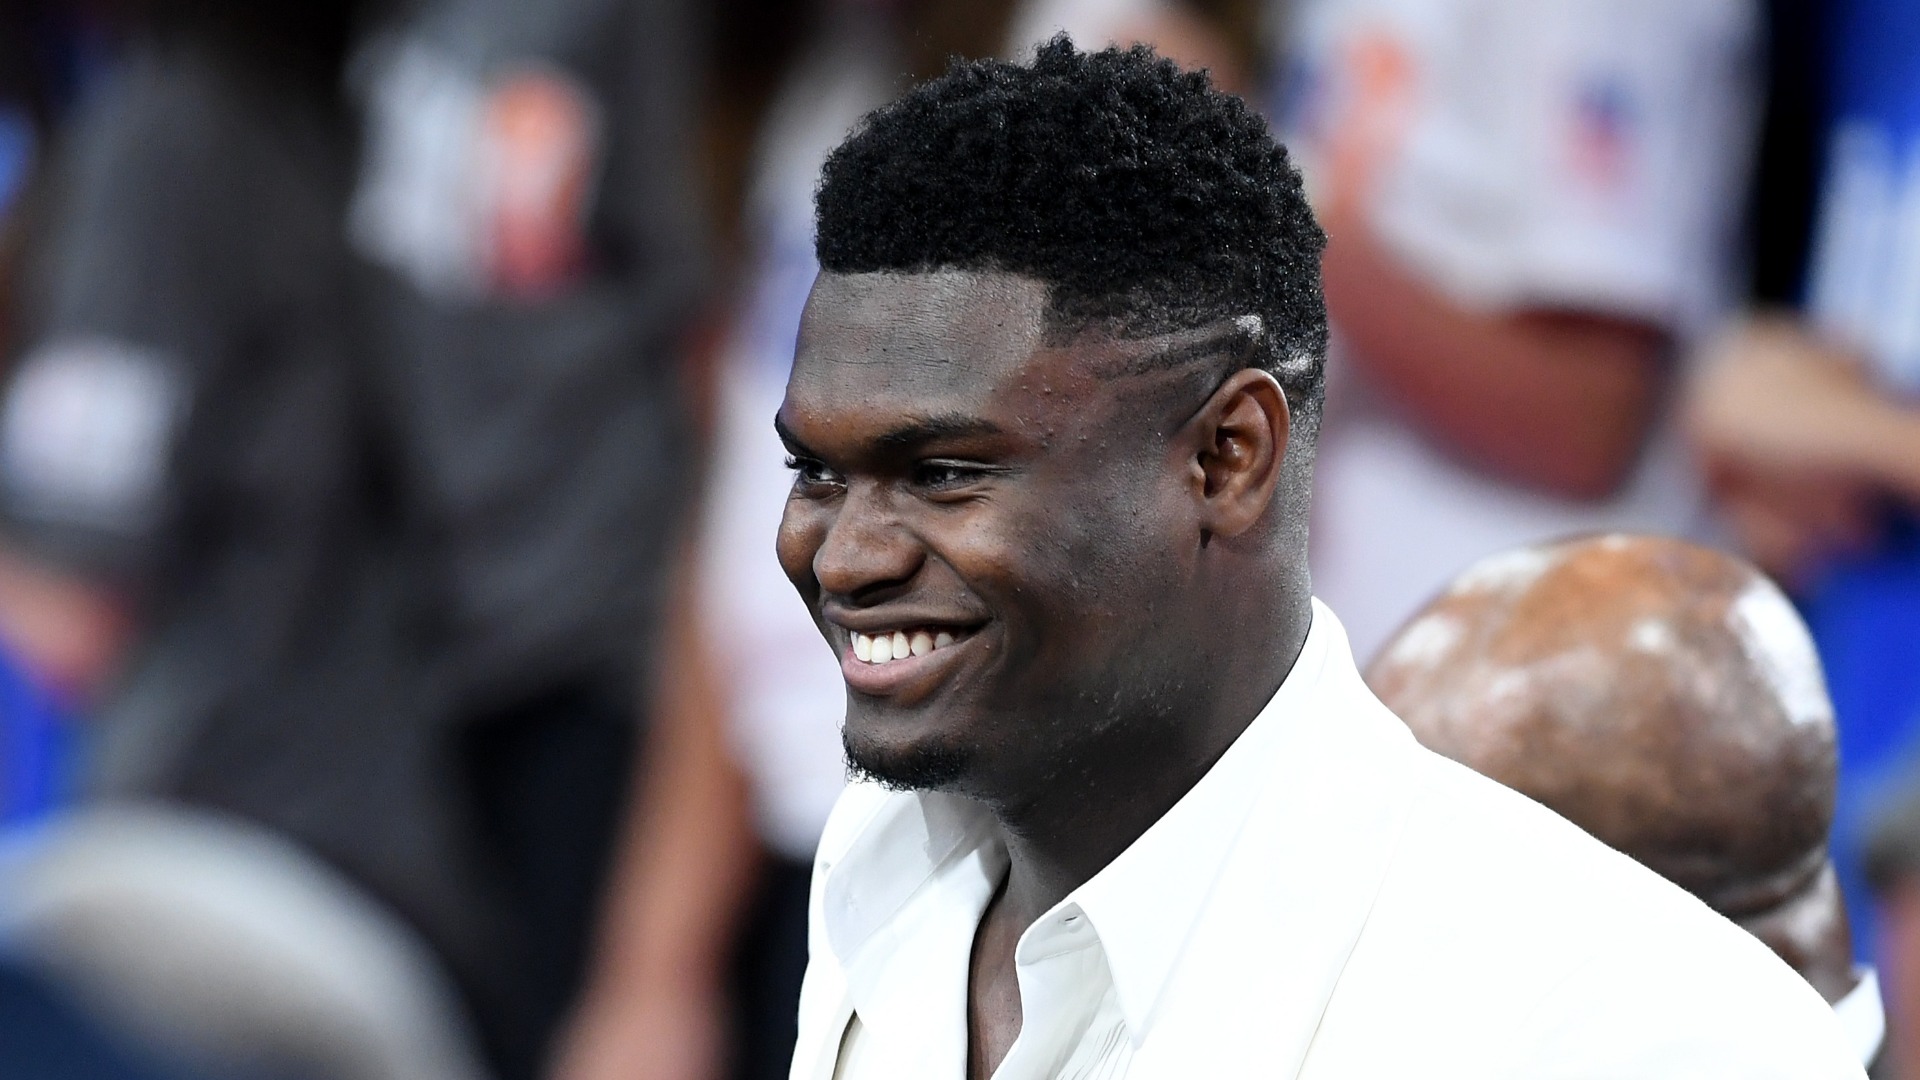 LeBron James said he would be available to talk to Zion Williamson - an offer the number one pick intends to accept.